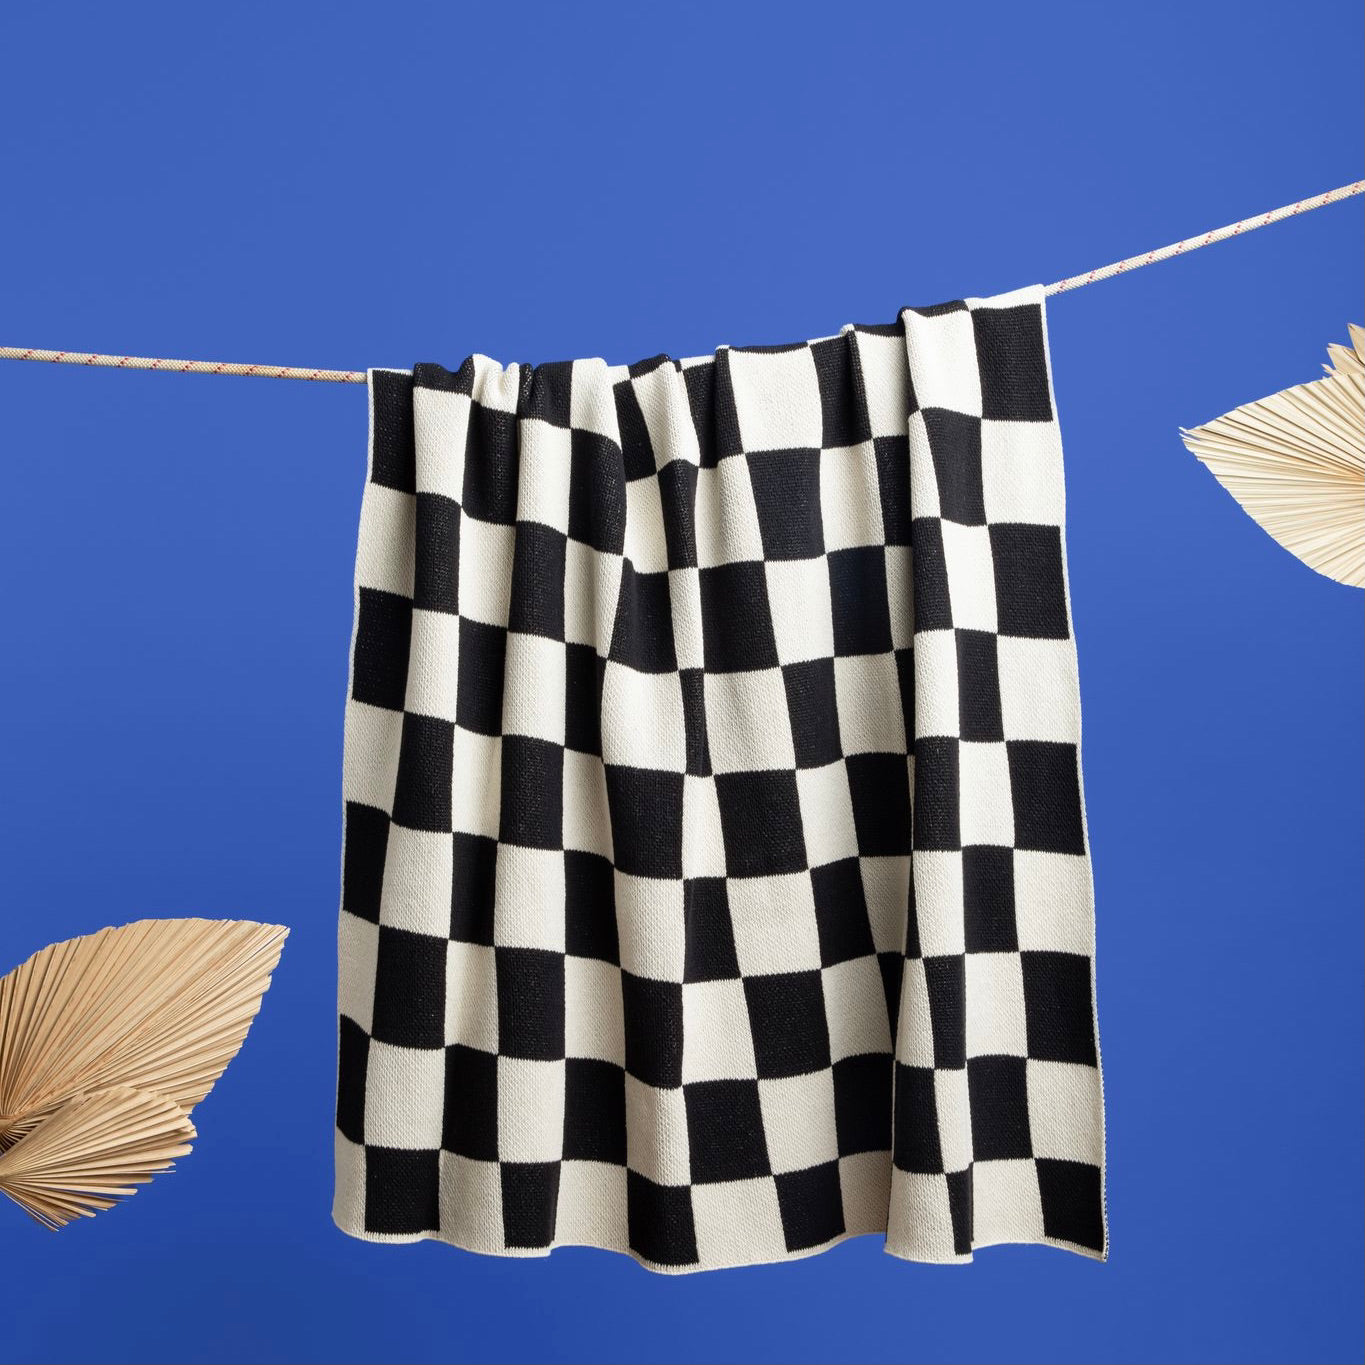 Black and White Checker Throw Hanging on a Rope